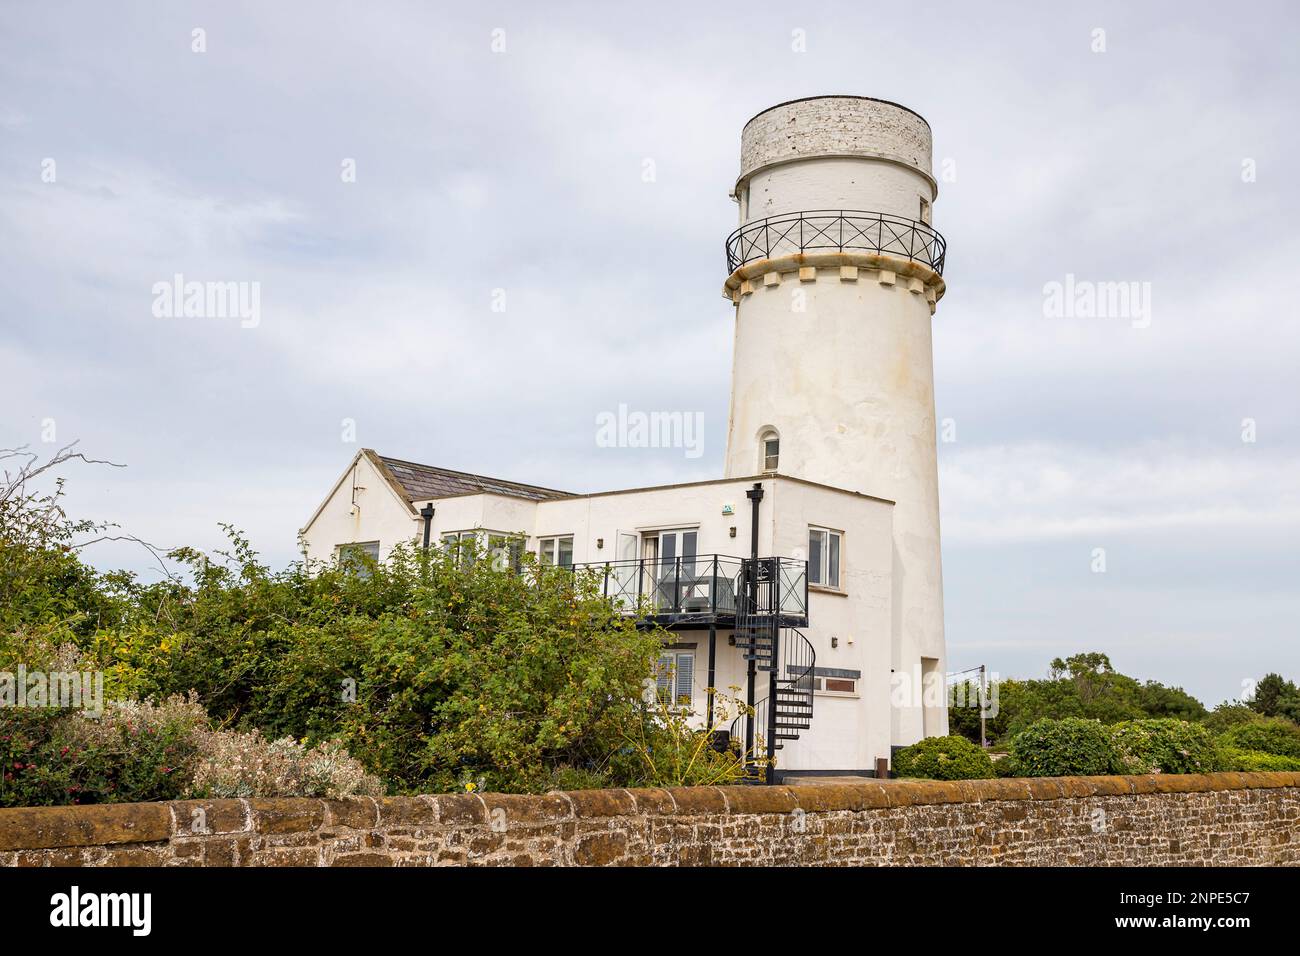 Hunstanton lighthouse on the West Norfolk coast behind a rustic wall on the seafront. Stock Photo